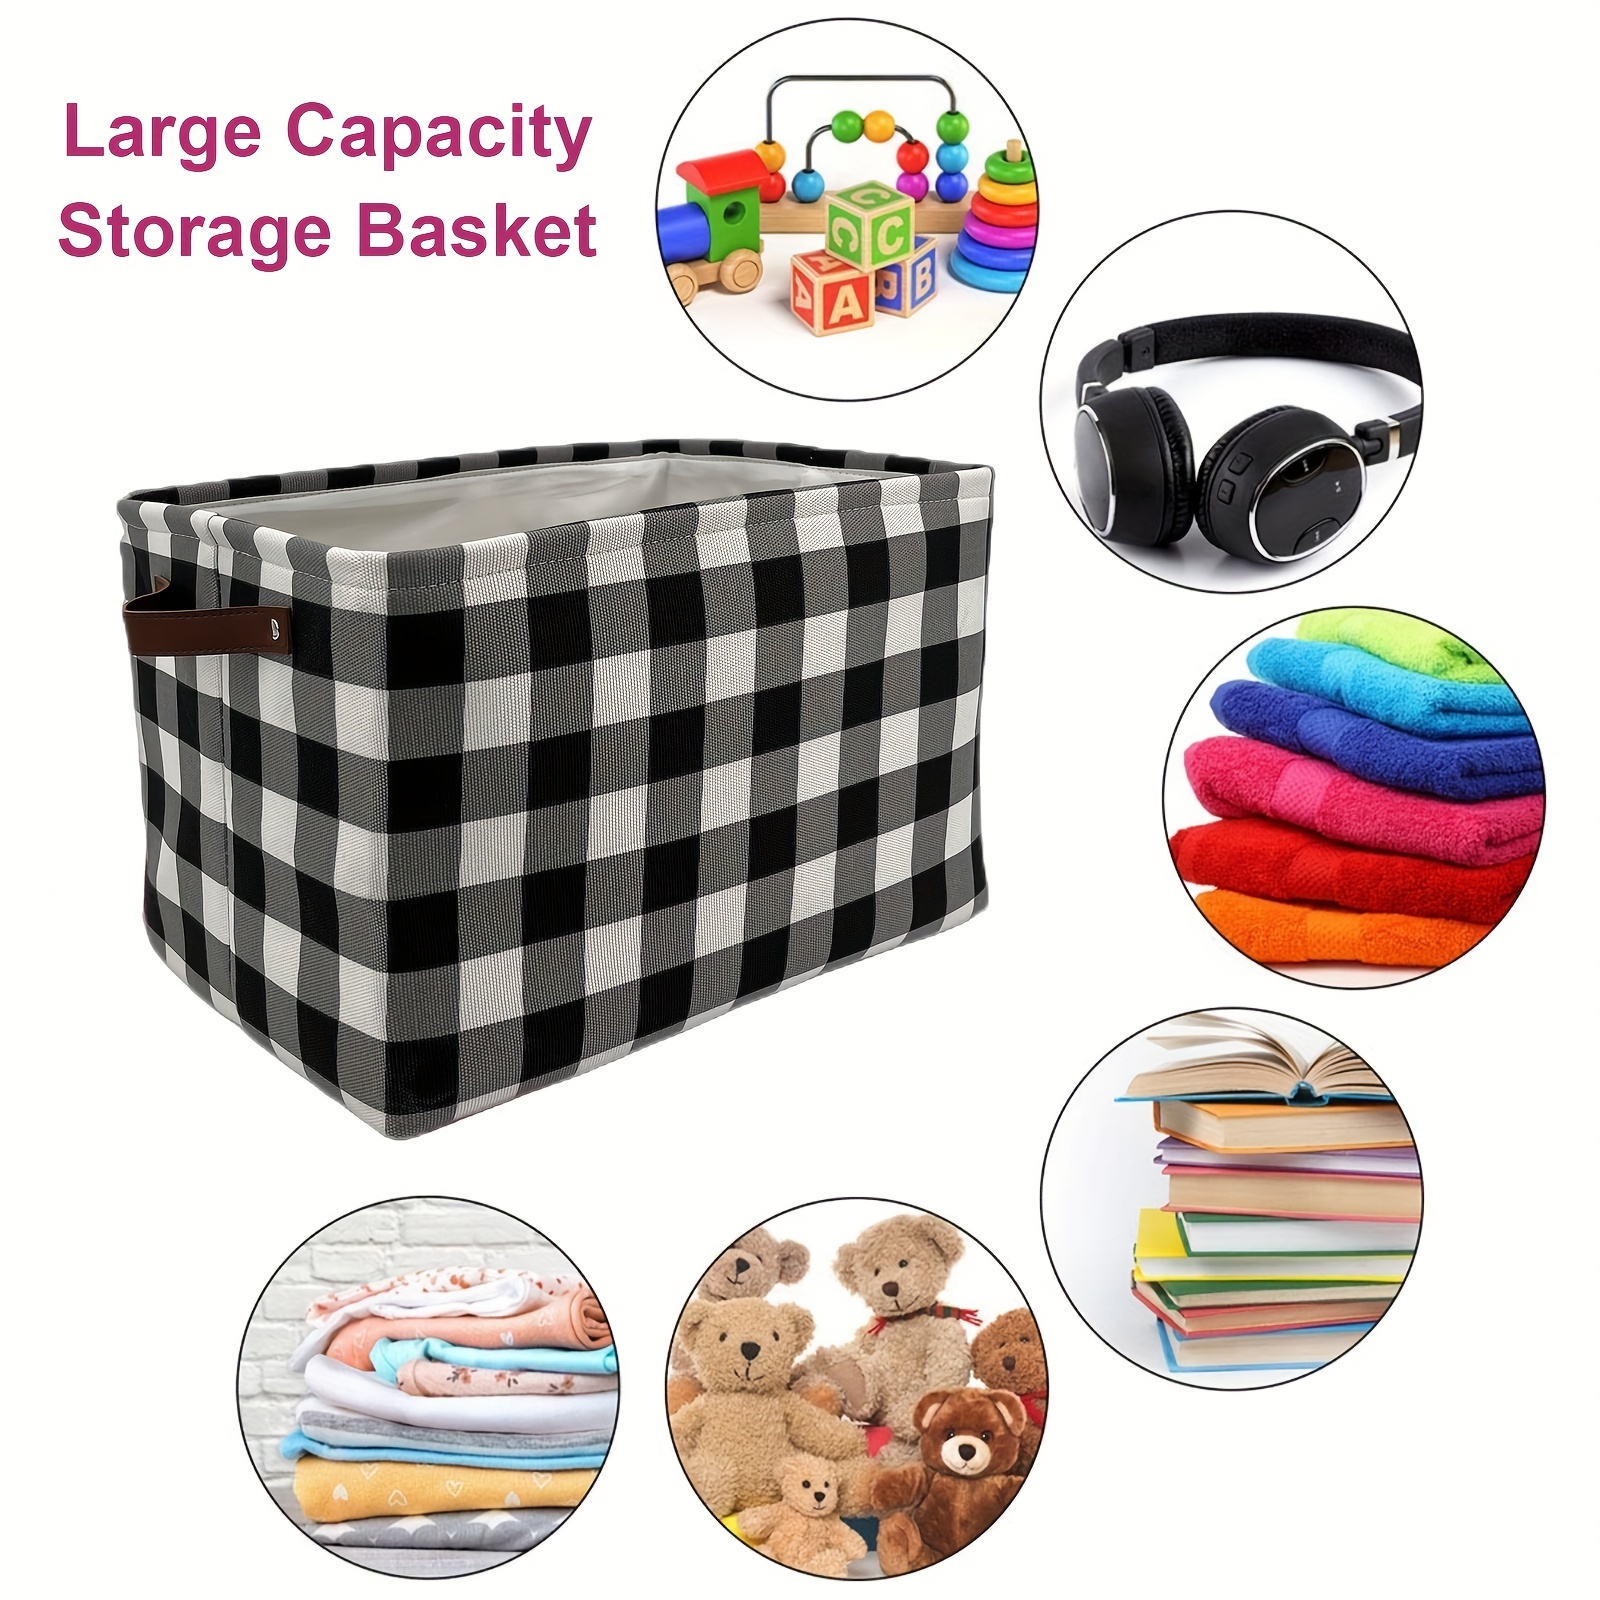  Large Foldable Storage Basket Simple Blue Stripes Storage Bin  Canvas Toys Box Fabric Decorative Collapsible Organizer Bag with Handles  for Bedroom Home